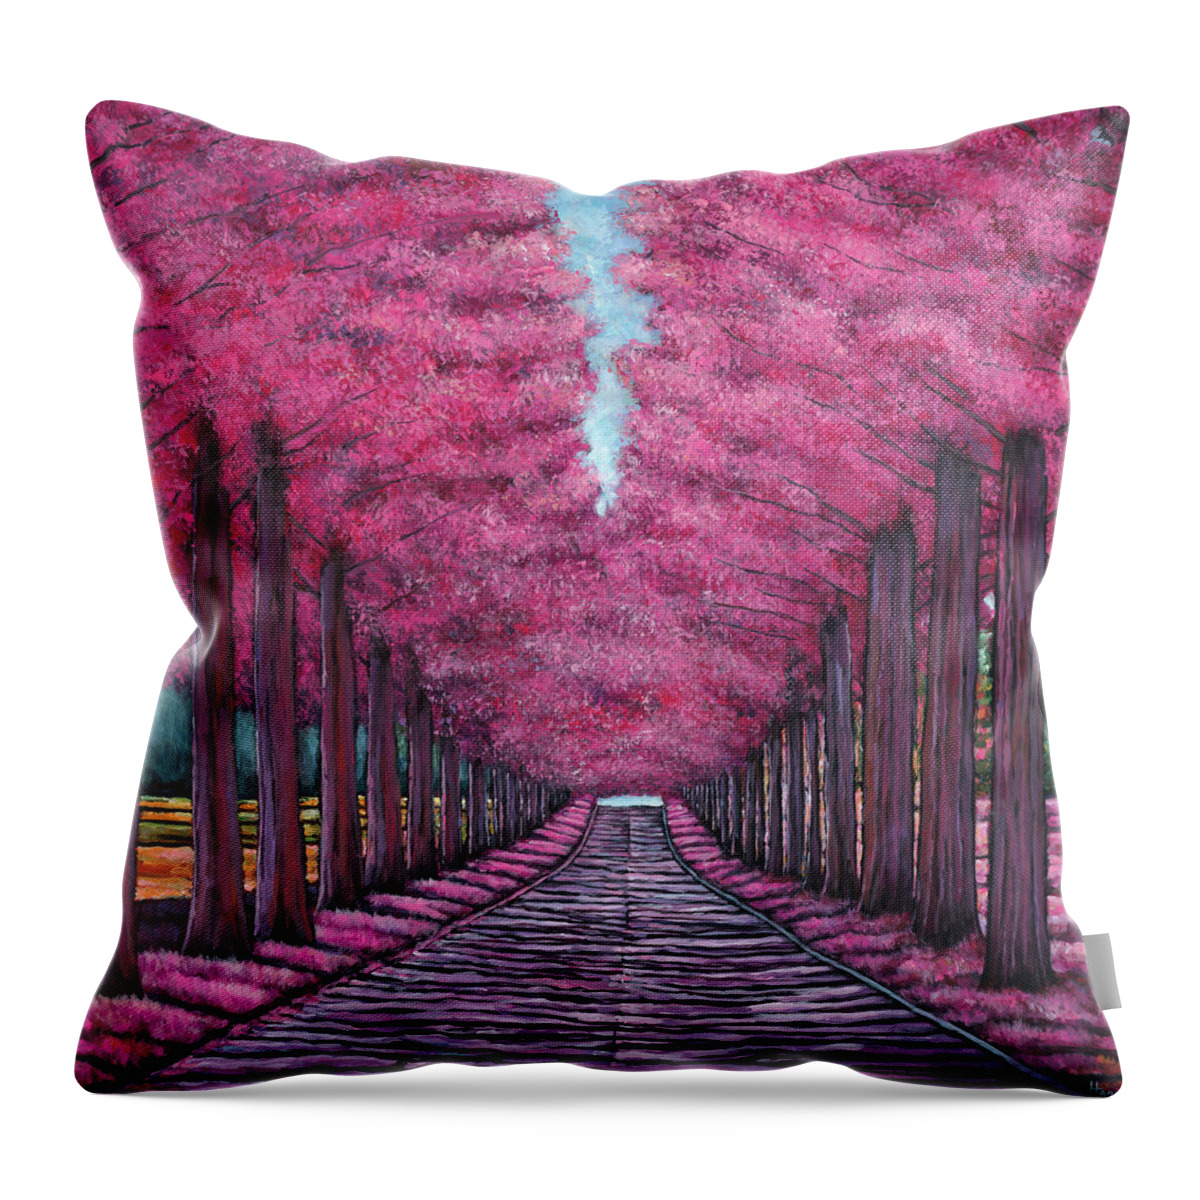 Landscape Throw Pillow featuring the painting Emerald Avenue by Johnathan Harris